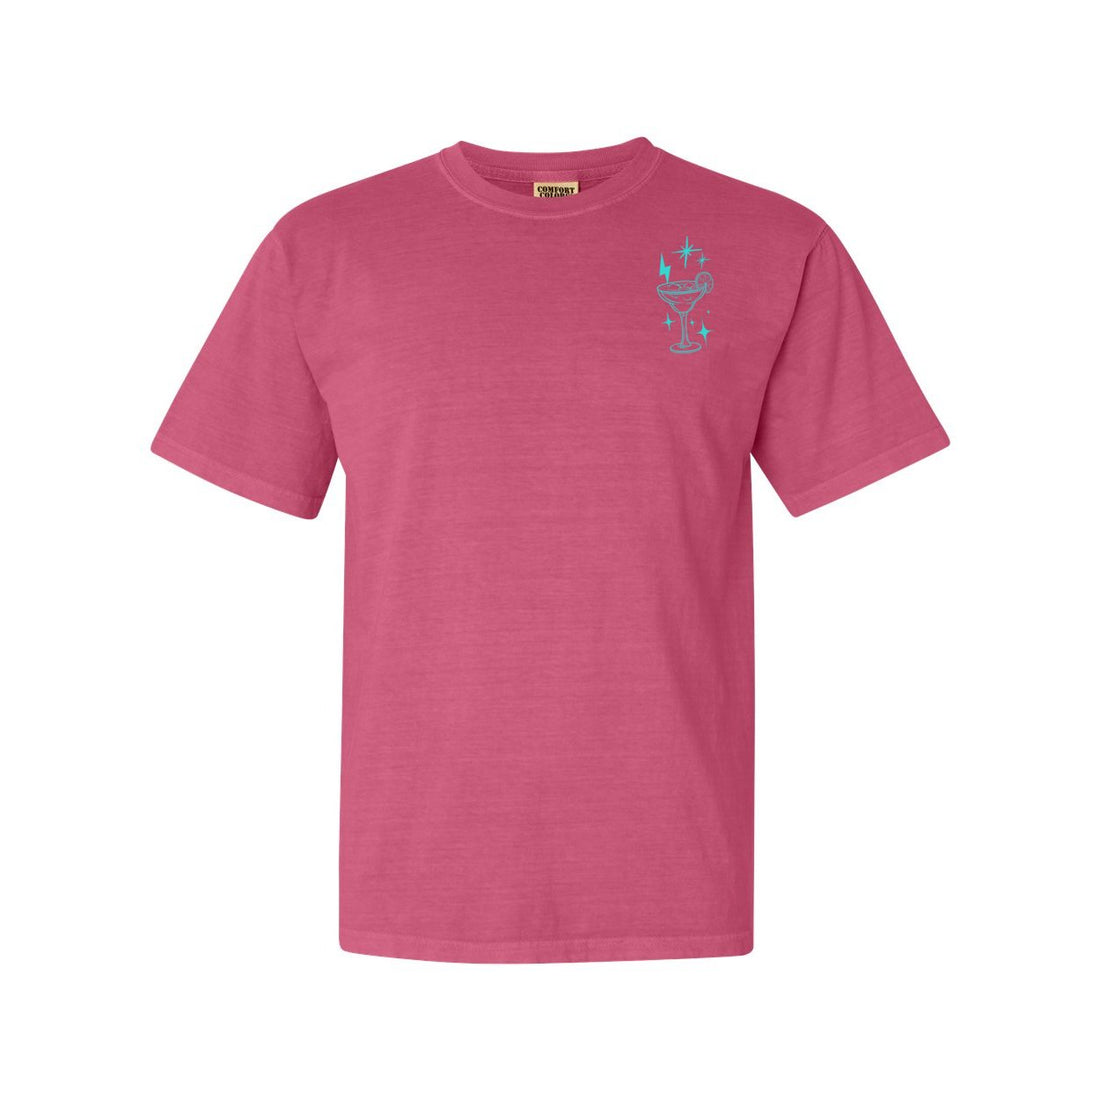 Tanned & Tipsy Comfort Colors Tee - T-Shirts - Positively Sassy - Tanned & Tipsy Comfort Colors Tee